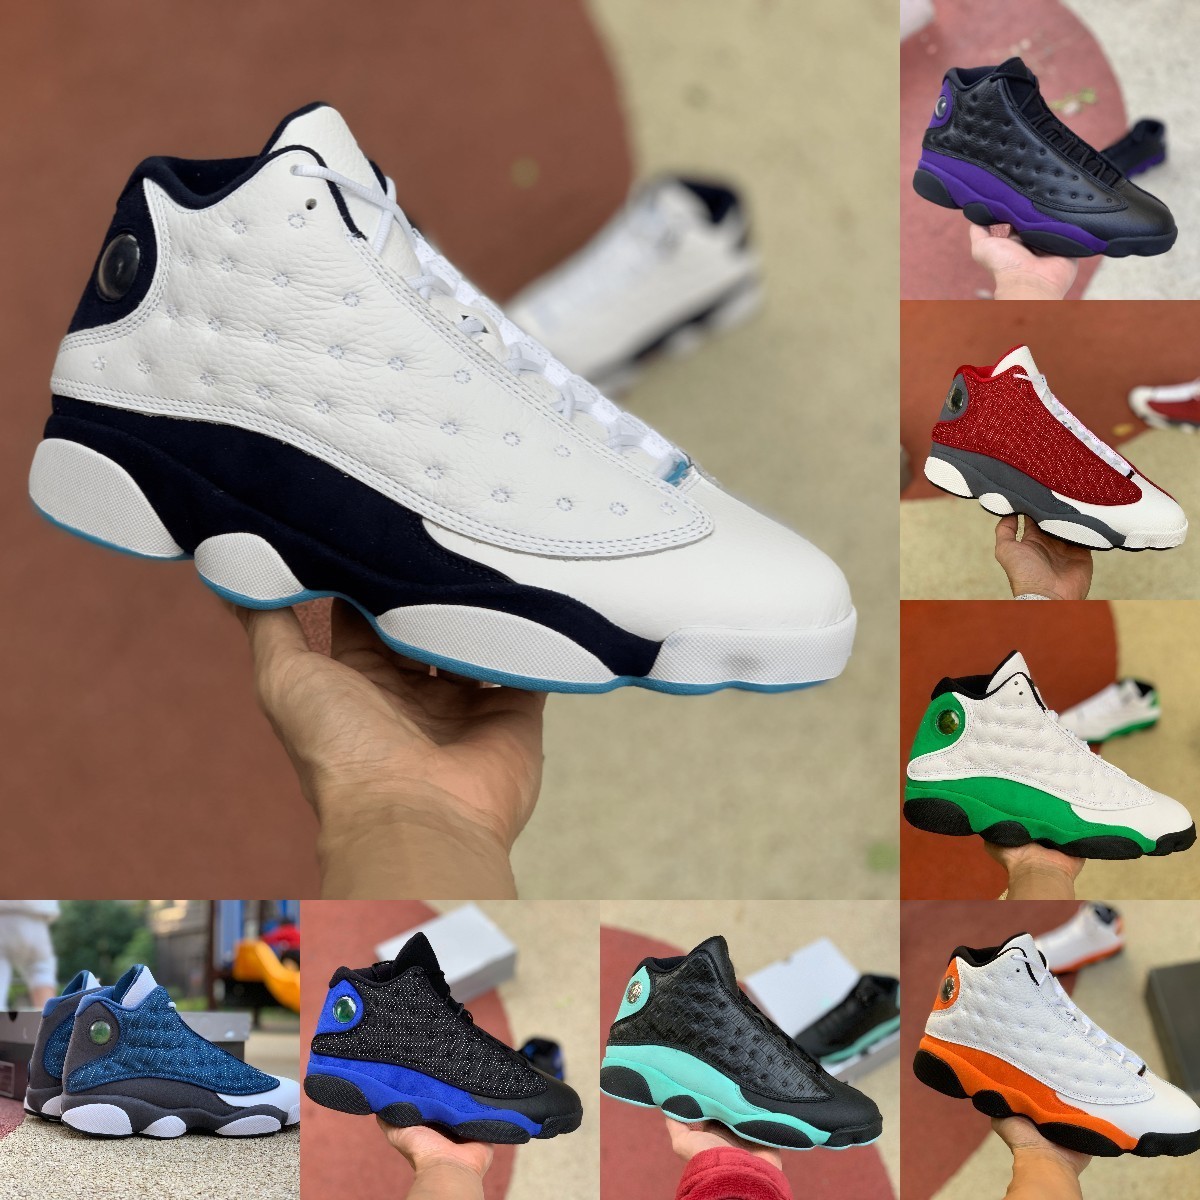 

Jumpman 13 13S Casual Basketball Shoes Mens High Flint Bred Island Green Red Dirty Hyper Royal Starfish He Got Game Black Cat Court Purple Chicago Trainer Sneakers, Please contact us